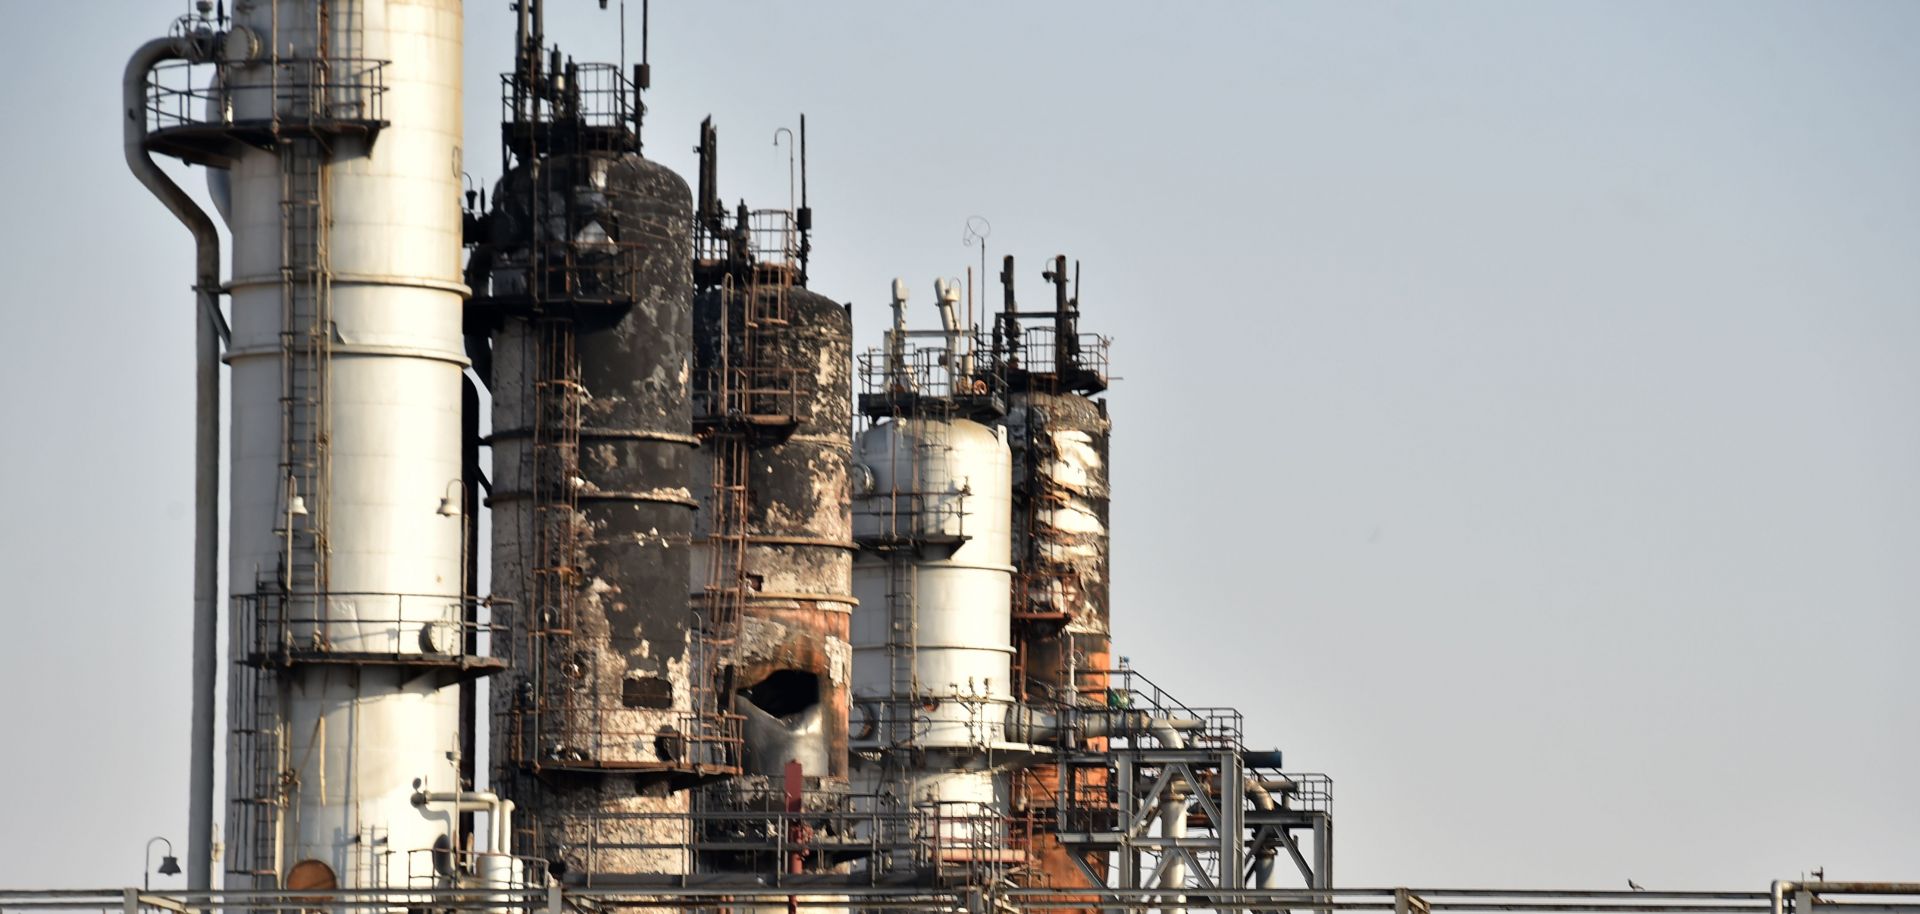 This Sept. 20, 2019, photo shows the damage at Saudi Arabia's Abqaiq oil processing plant following attacks six days before.